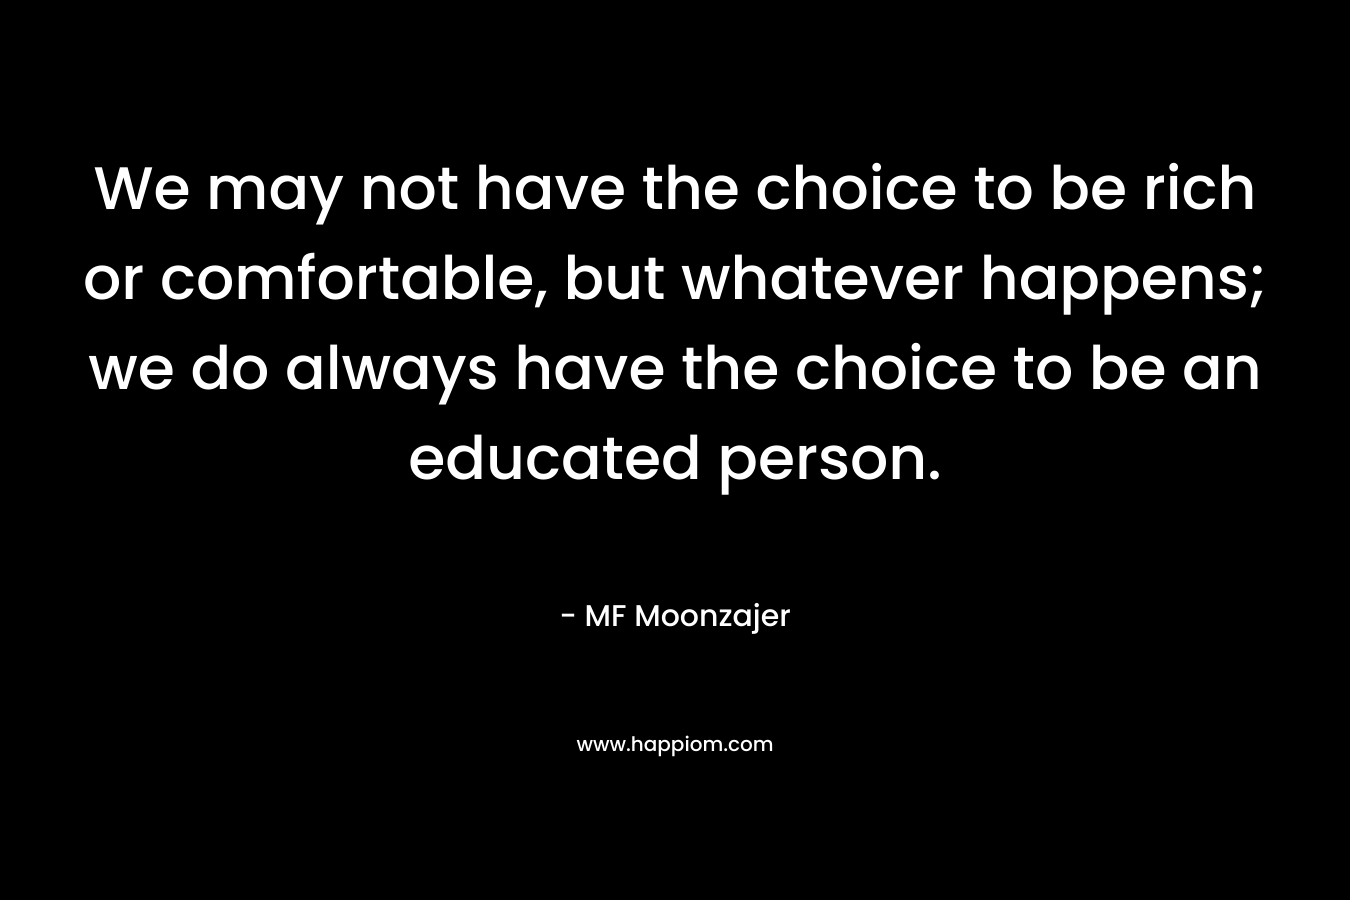 We may not have the choice to be rich or comfortable, but whatever happens; we do always have the choice to be an educated person. – MF Moonzajer